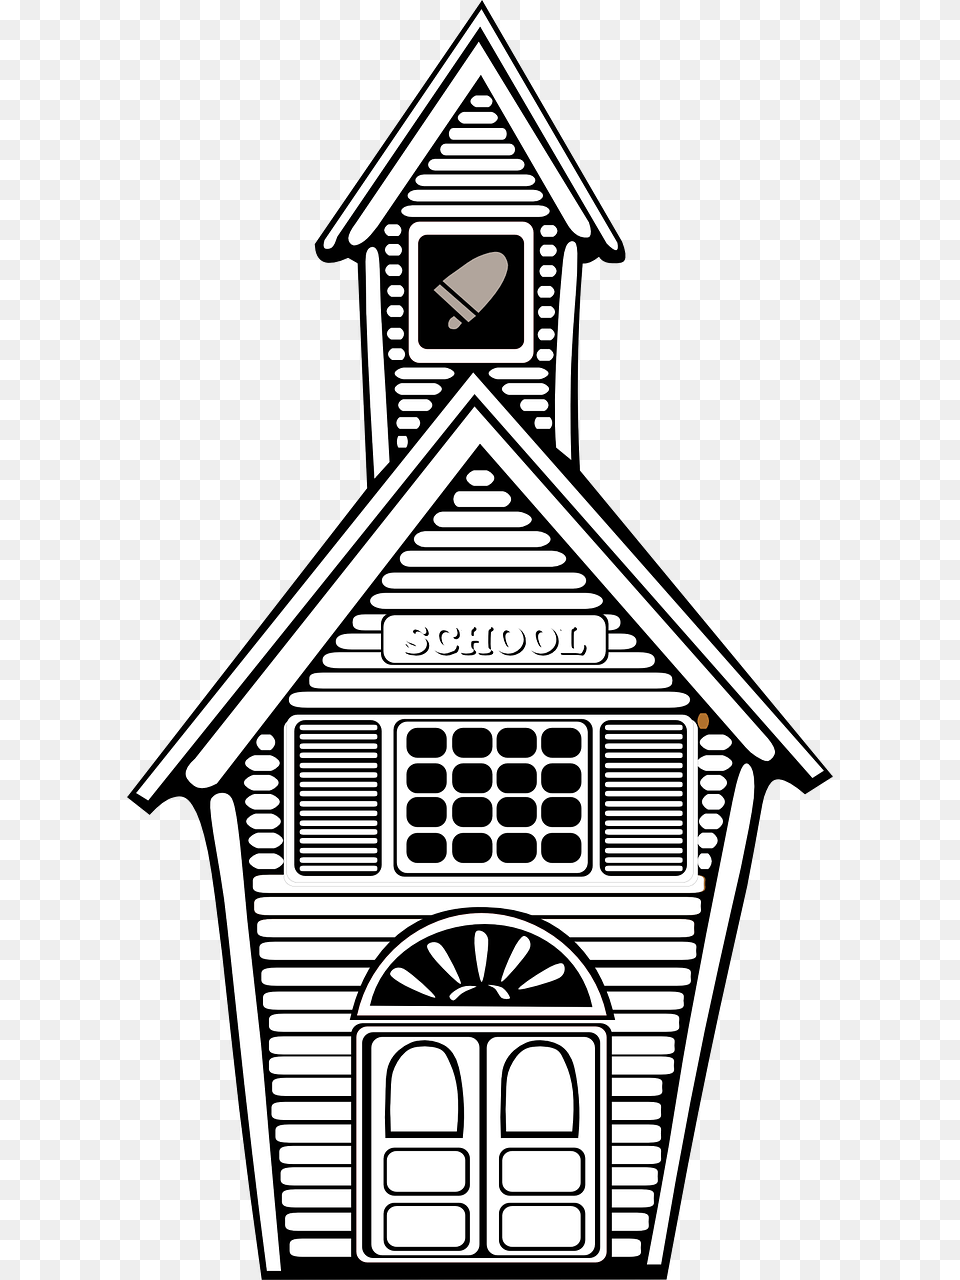 School Building Clock Picture School Building Clip Art, Architecture, Bell Tower, Tower, Clock Tower Free Png Download